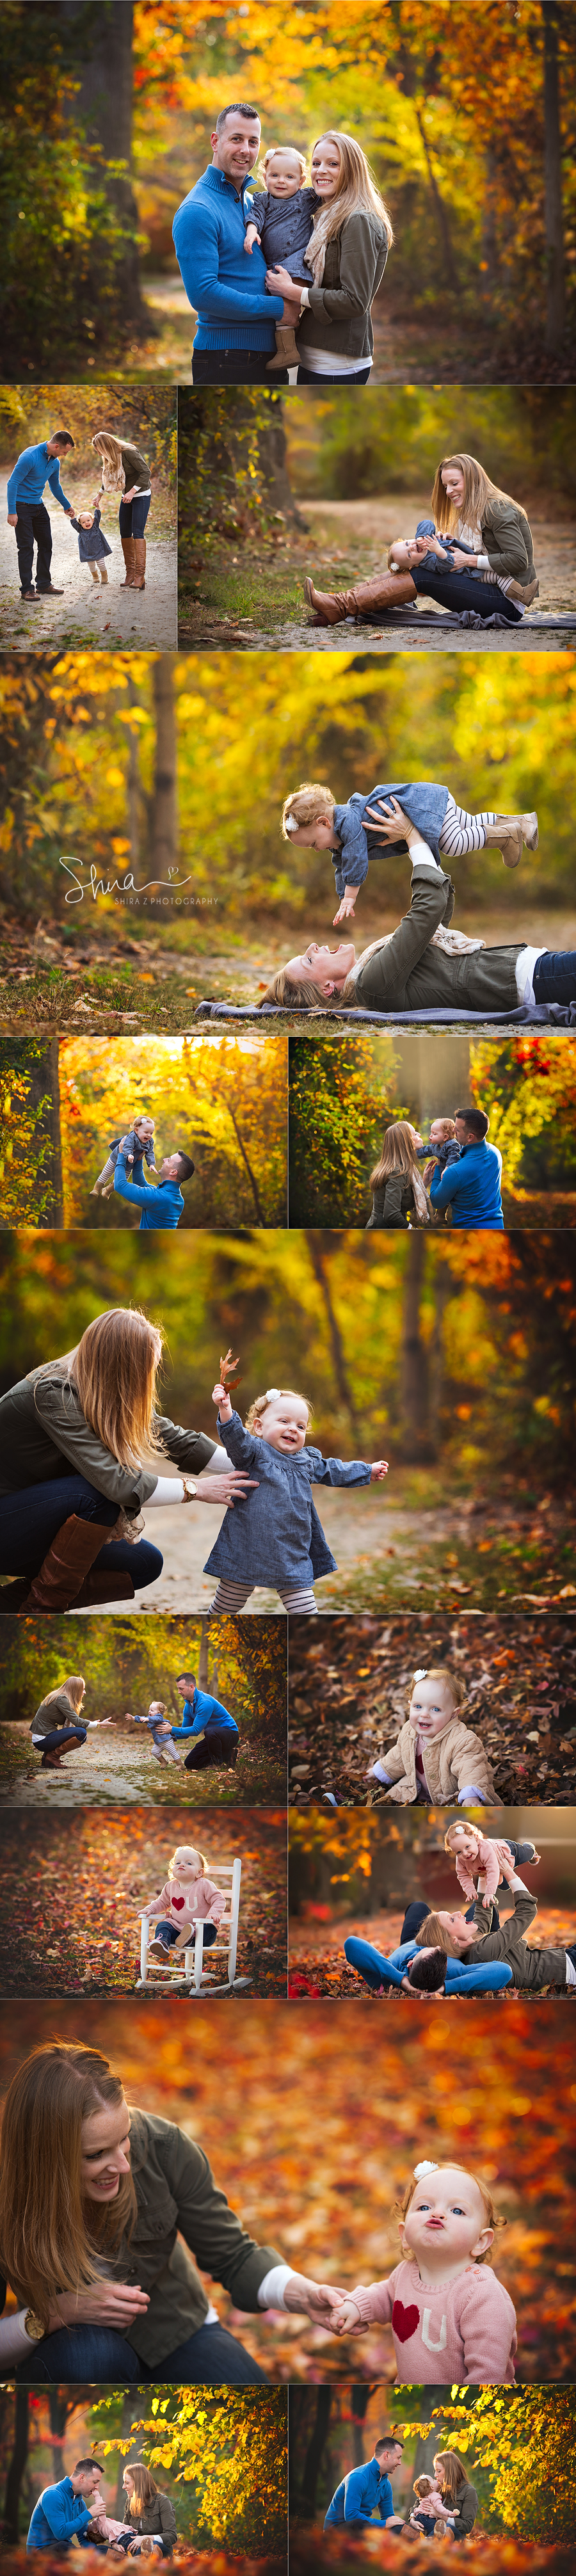 family photographer, first birthday pictures, outdoor portraits